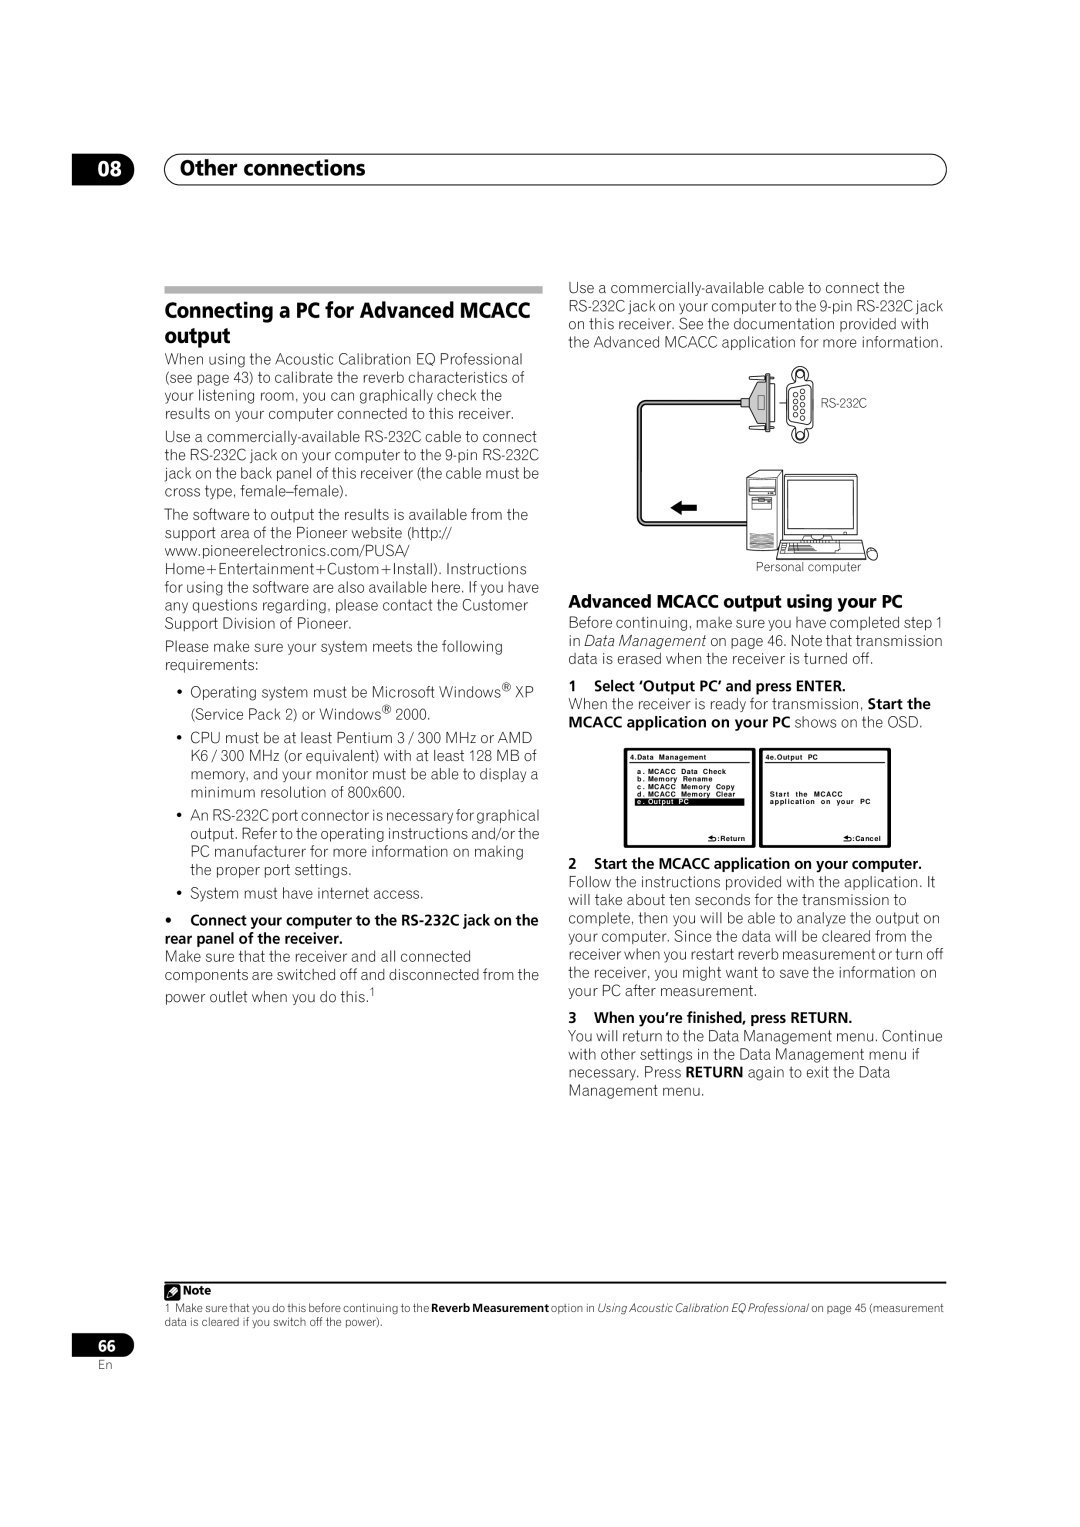 Pioneer VSX-01TXH Connecting a PC for Advanced MCACC output, Advanced MCACC output using your PC, 08Other connections 